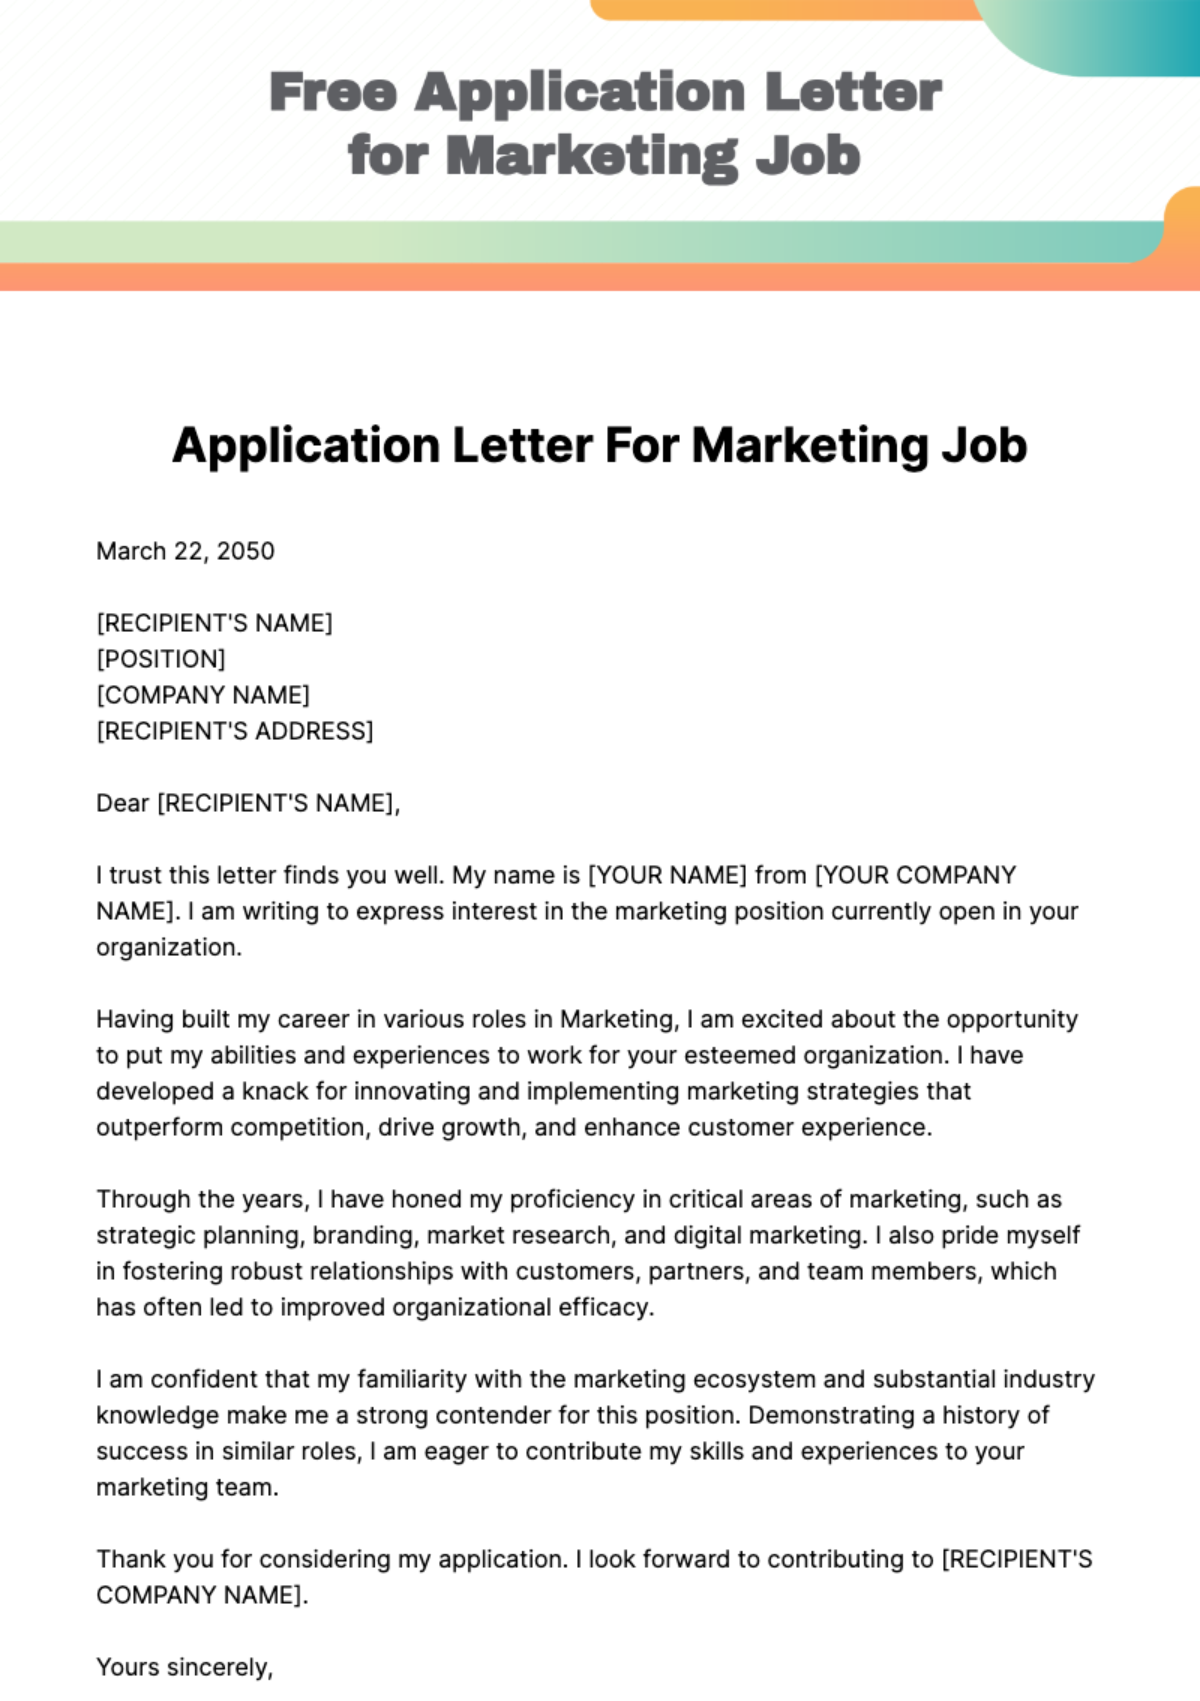 Free Application Letter for Marketing Job Template